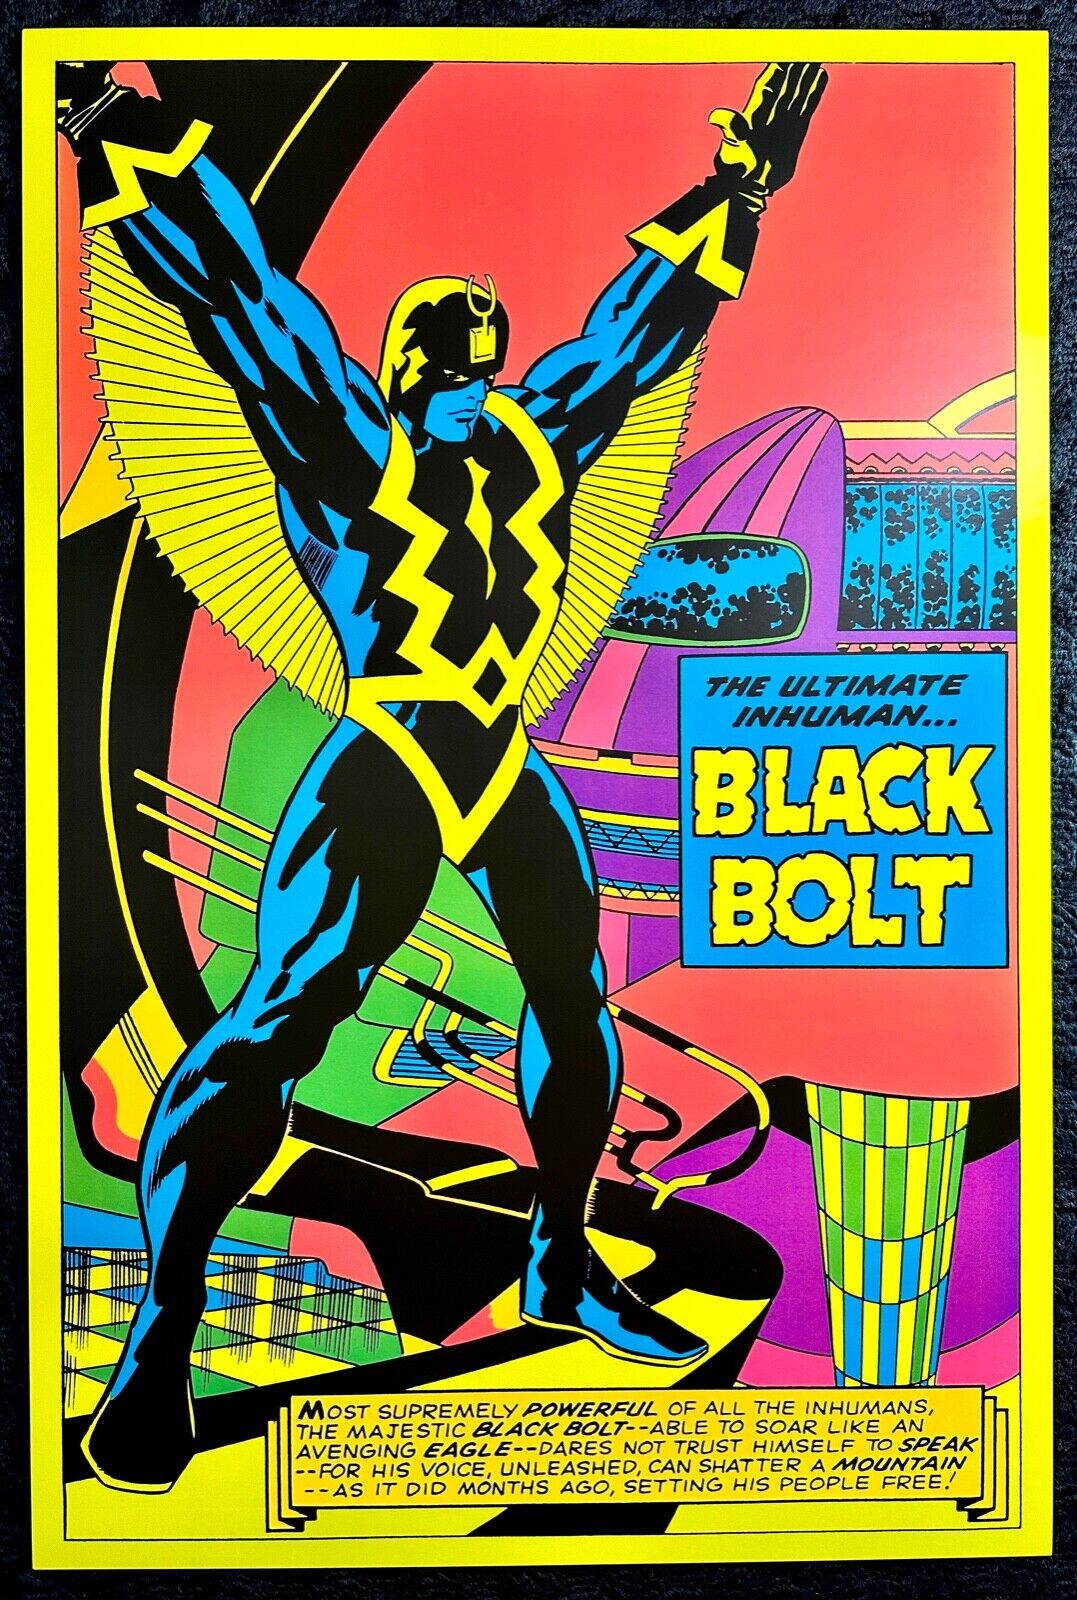 Black Bolt Black Light Marvel Comic Poster by Jack Kirby and Frank Giacoia